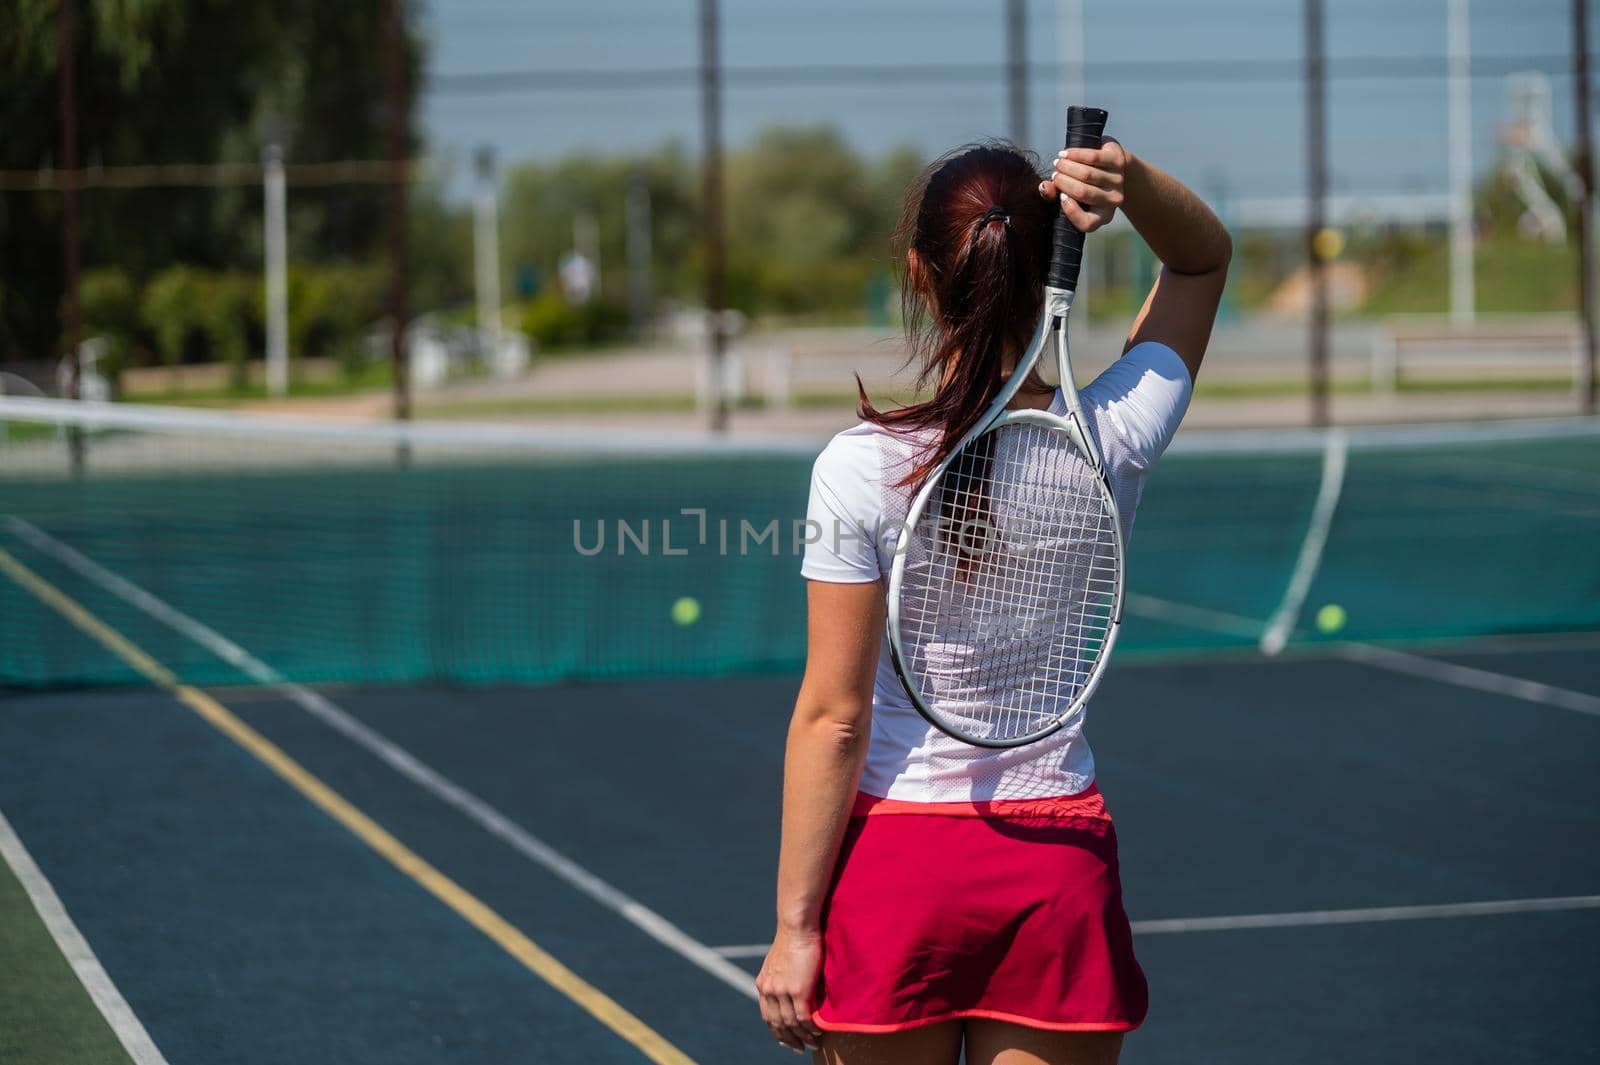 Woman in skirt standing back on the tennis court and holds the racket. by mrwed54